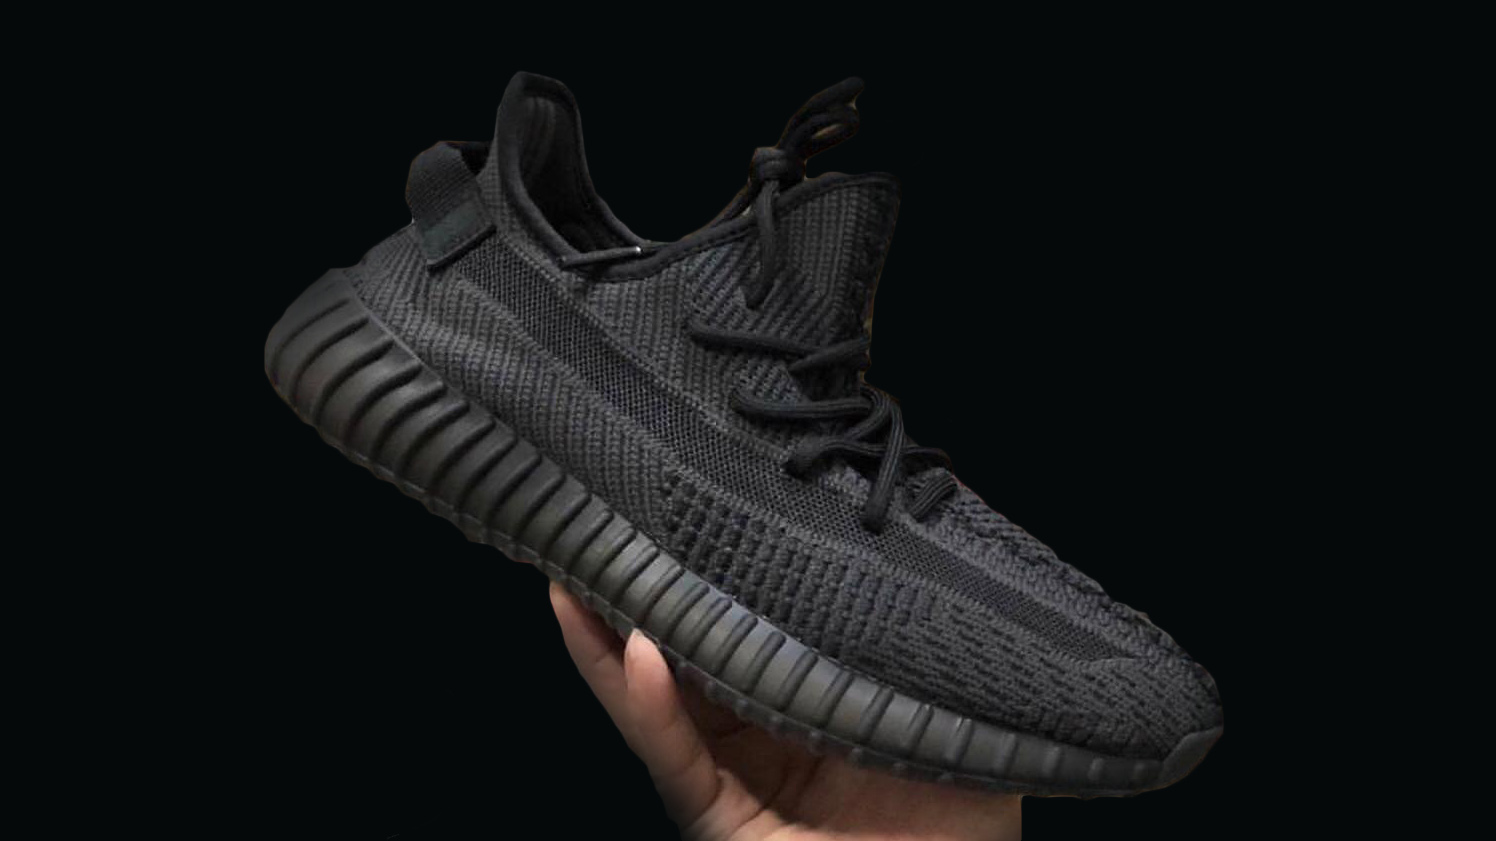 Yeezy Boost 350 v2 Black and more 